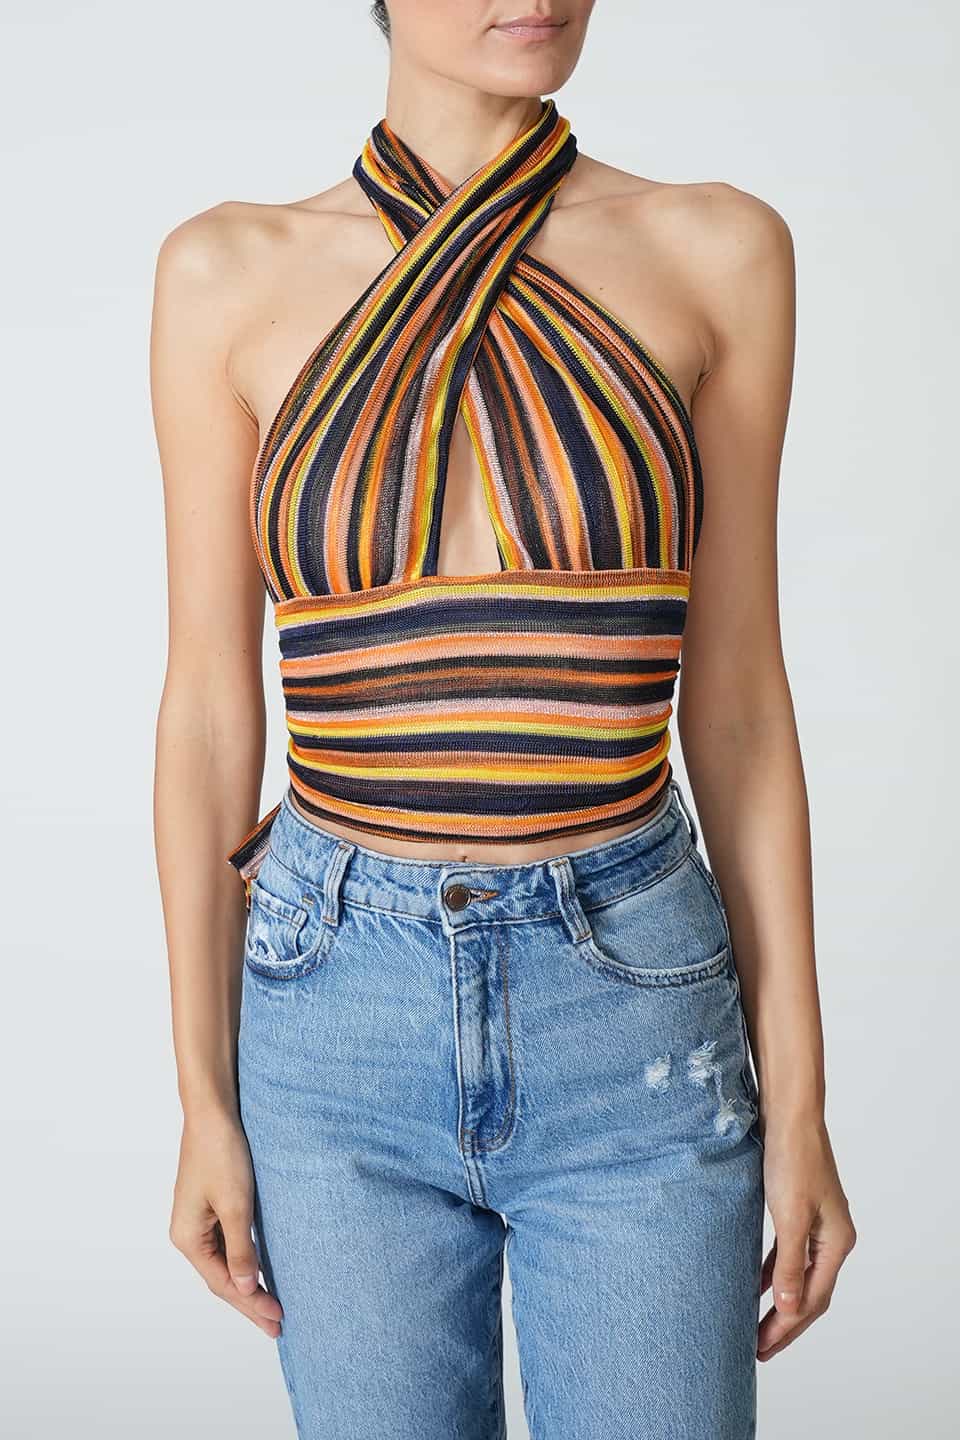 Thumbnail for Product gallery 2, Fashion designer halter top for online shopping in multicolor style with long straps